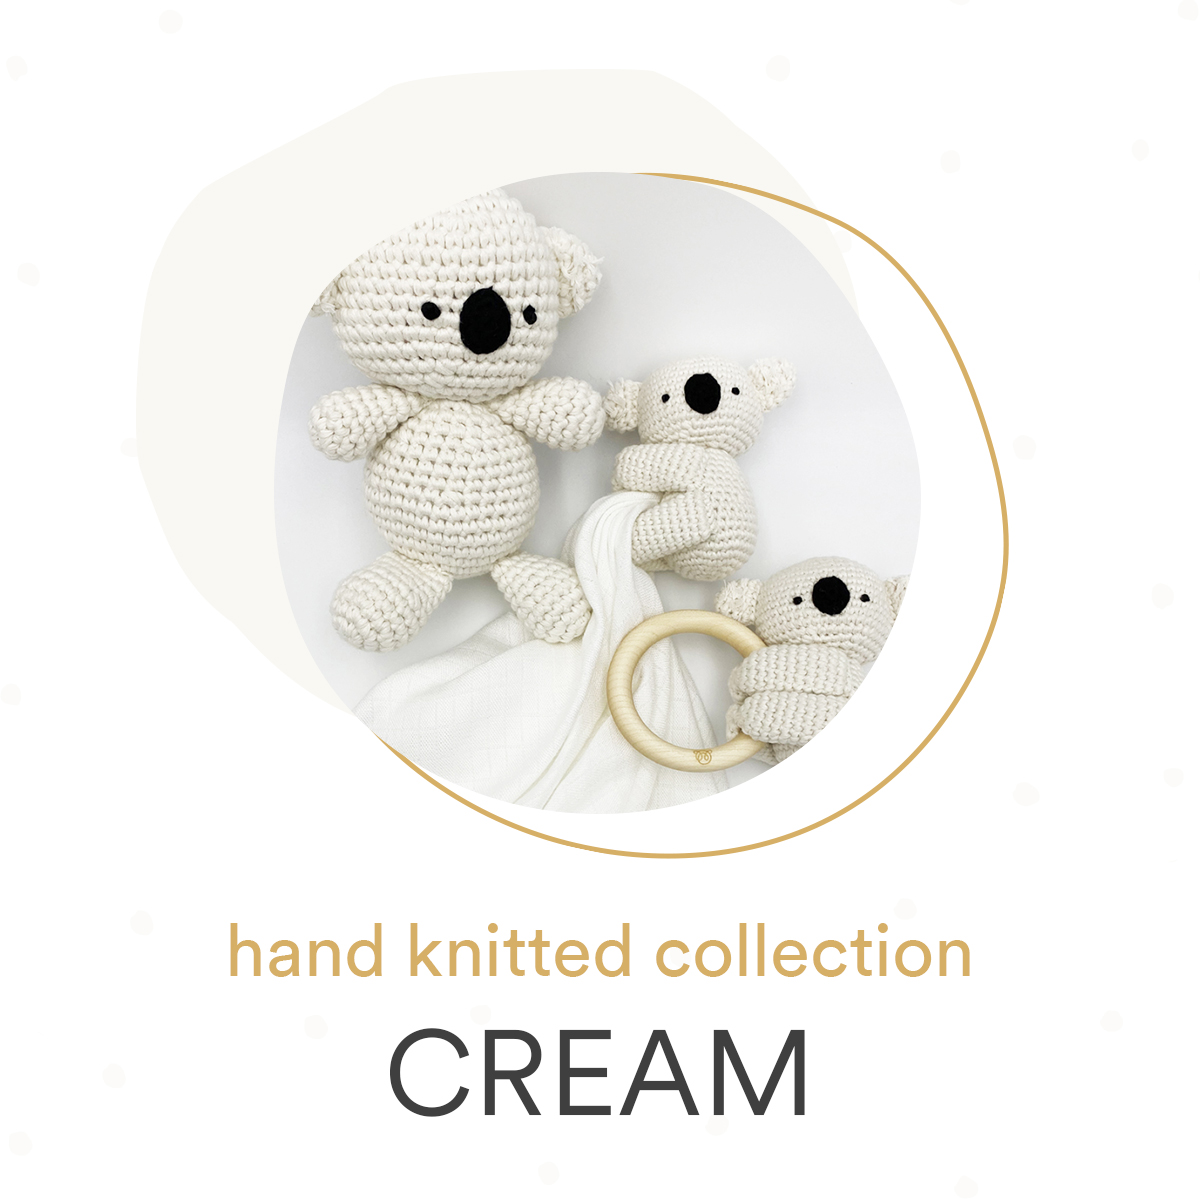 Hand knitted collection - Cream